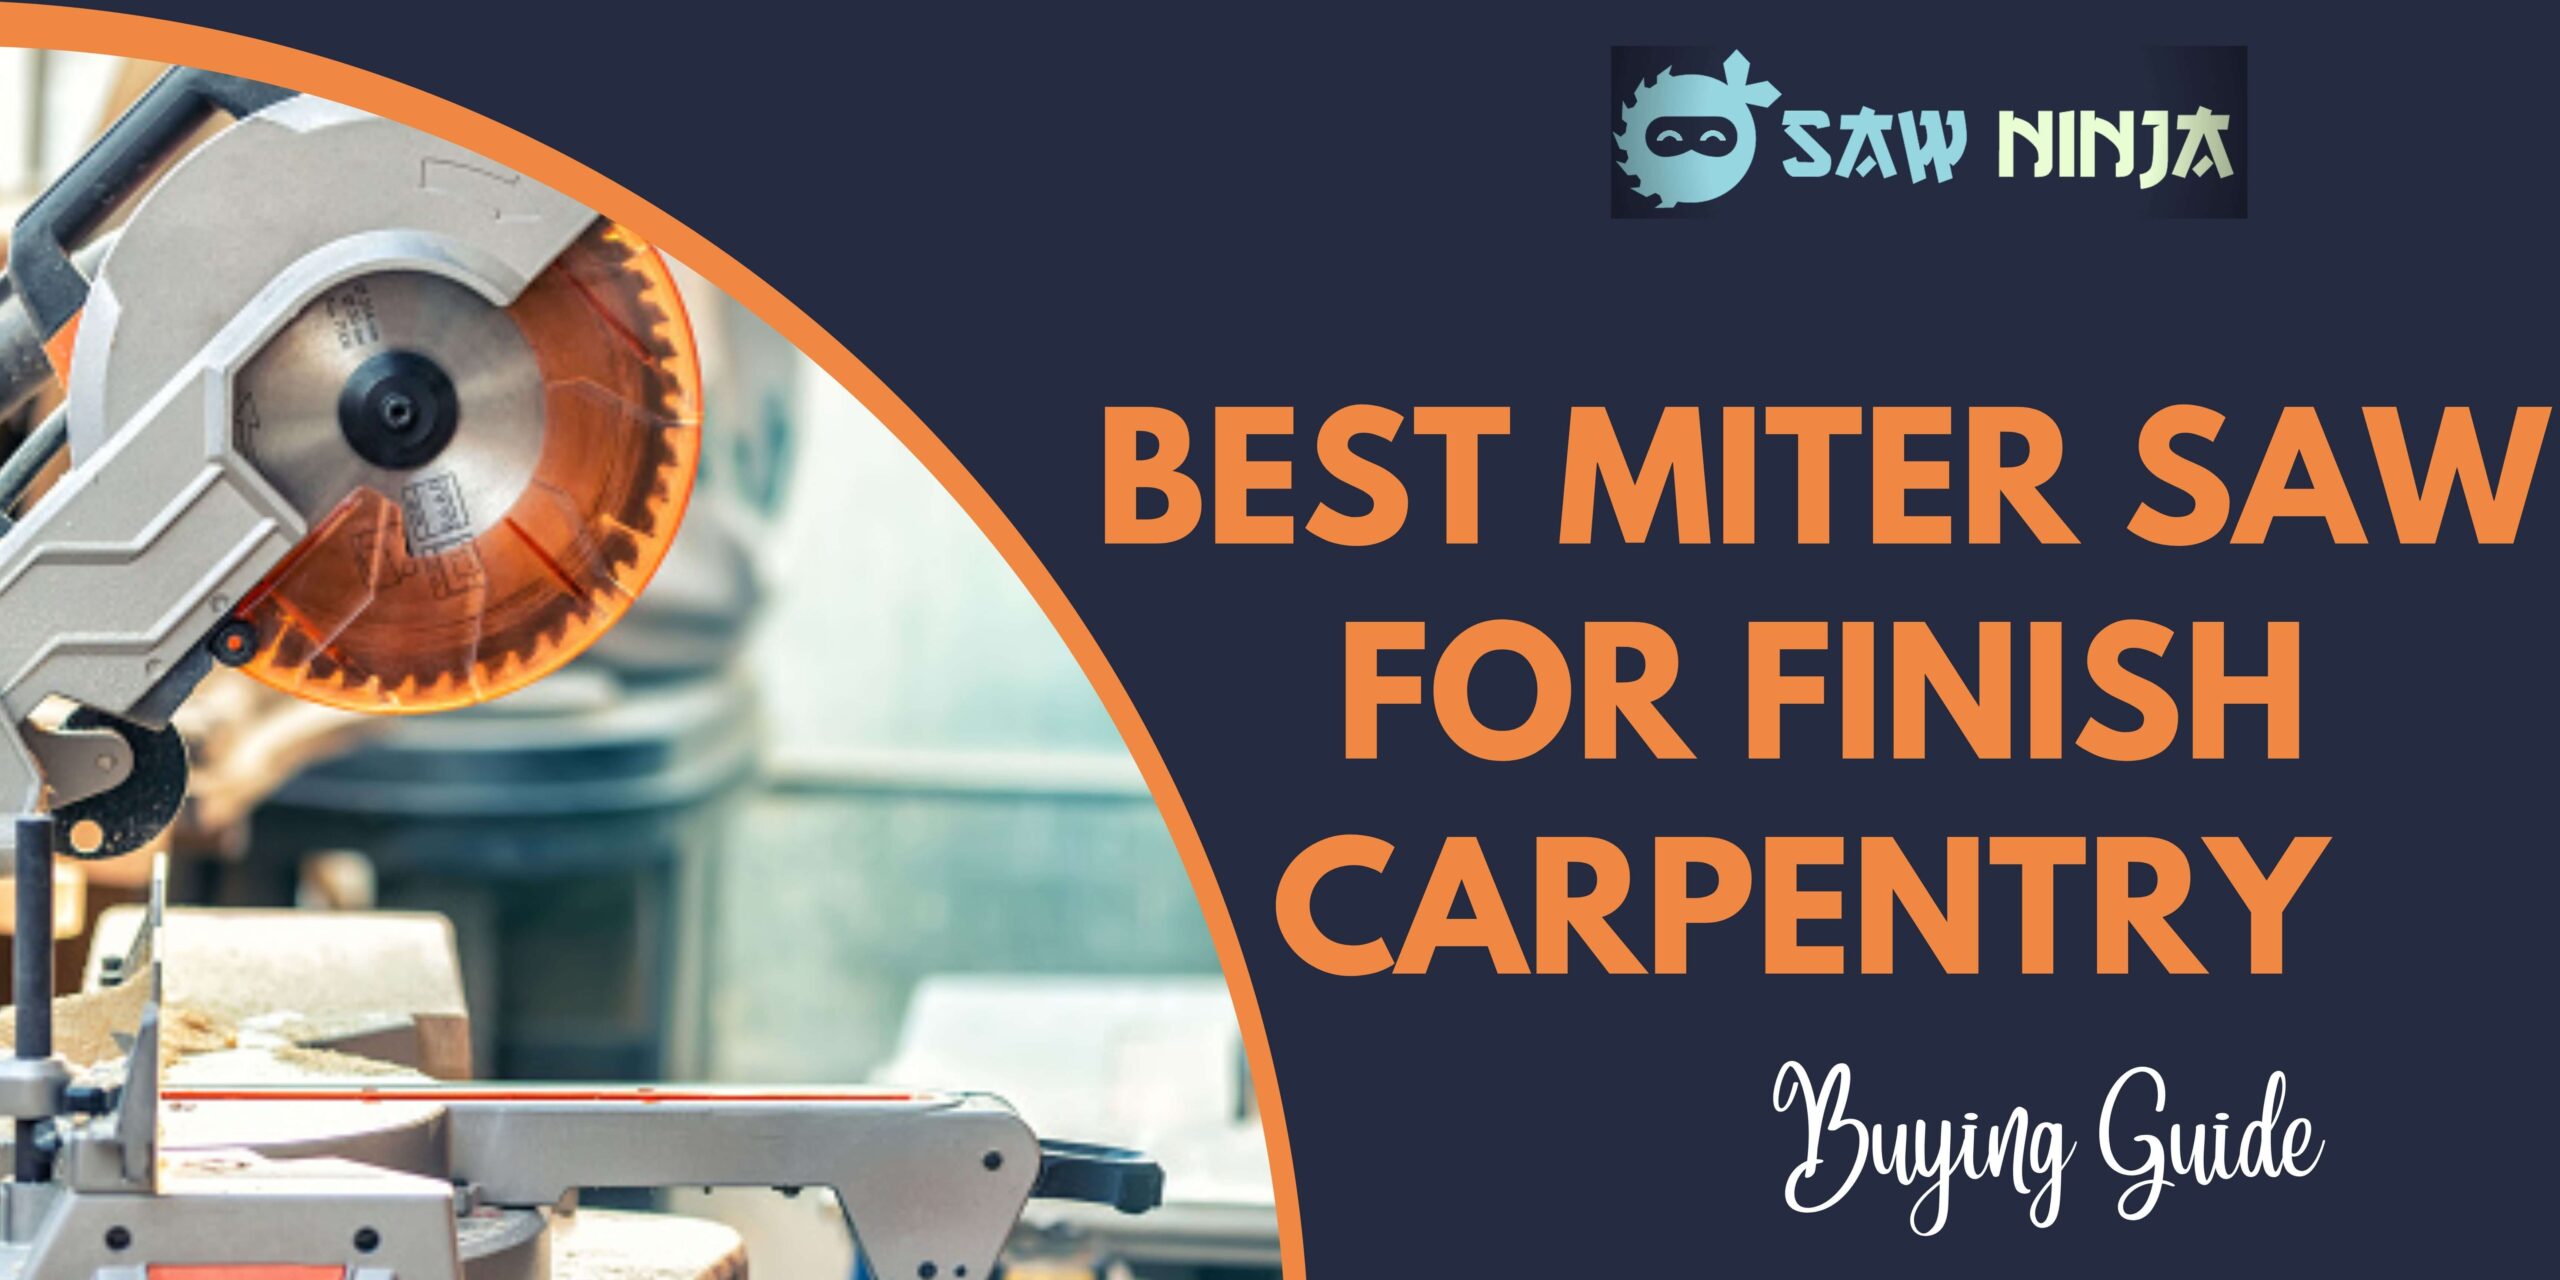 Best Miter Saw for Finish Carpentry